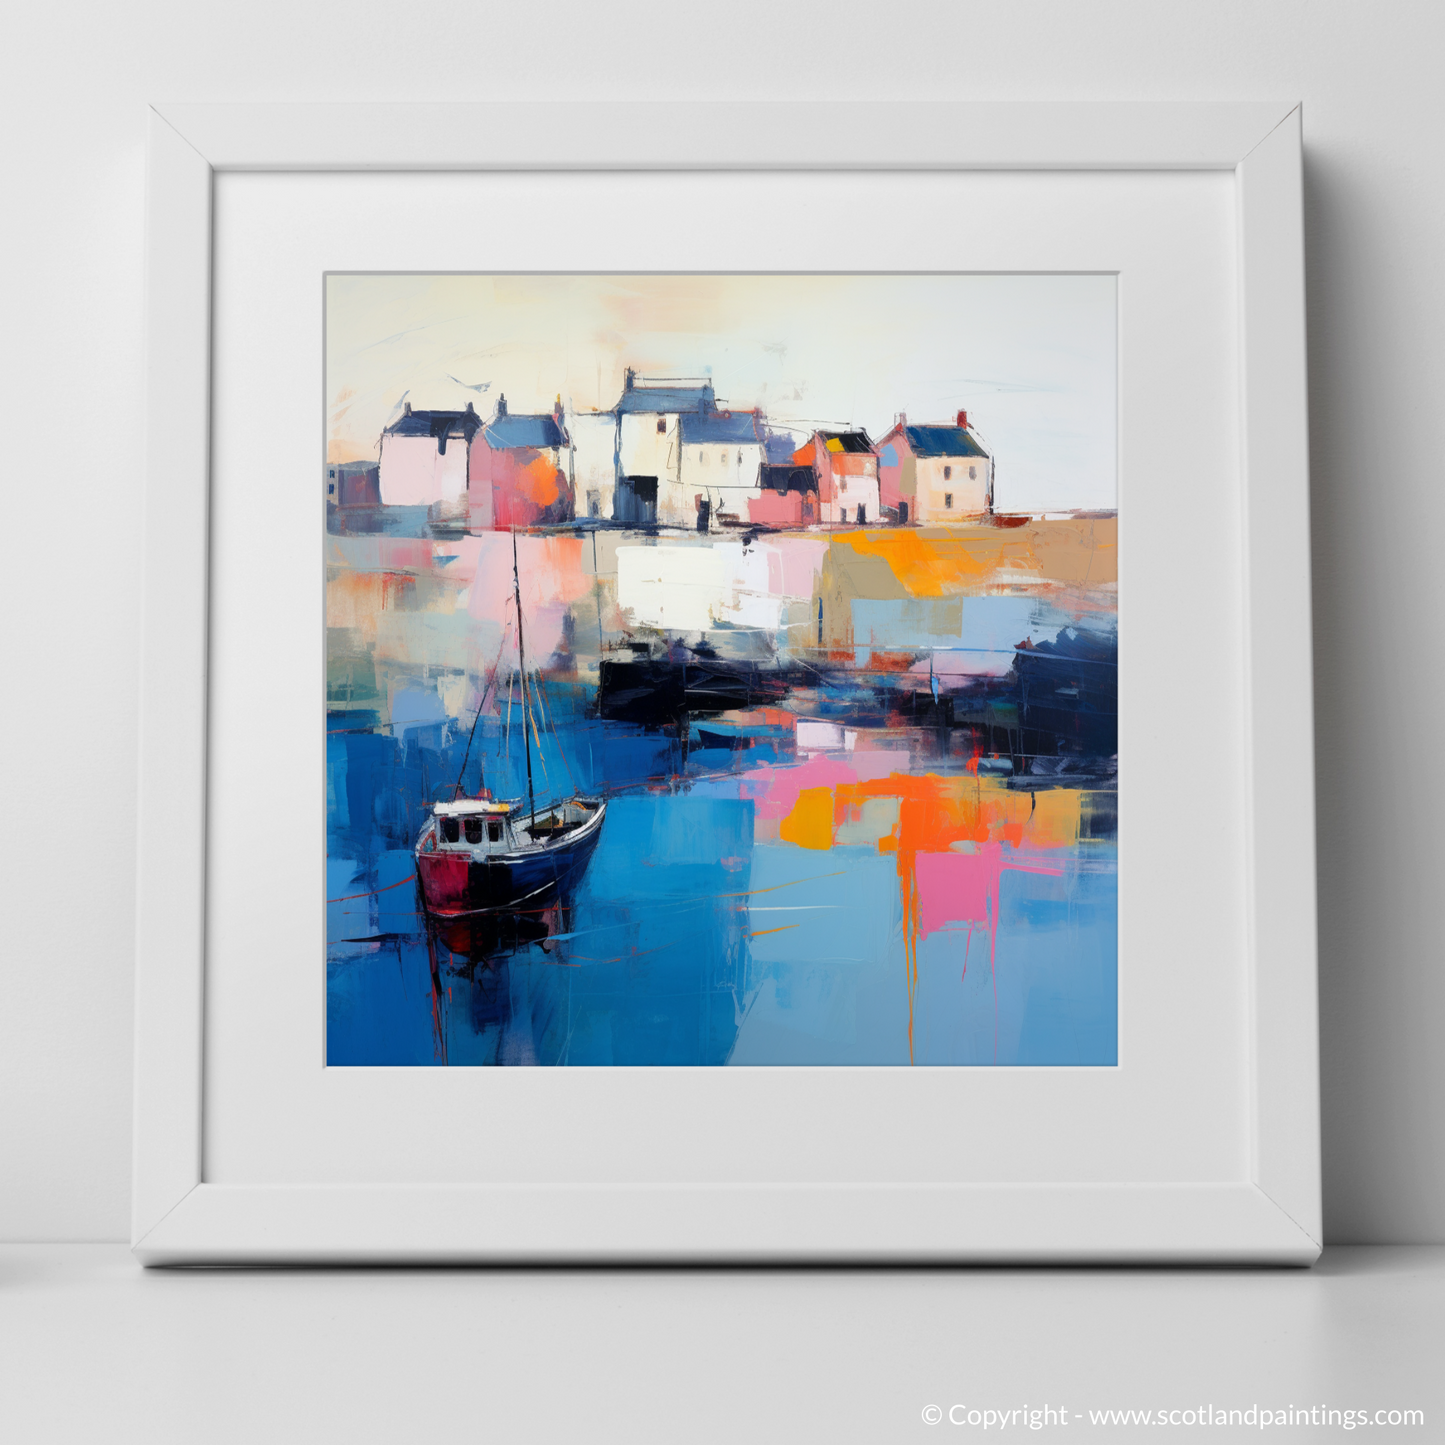 Pittenweem Harbour at Dusk: An Abstract Symphony